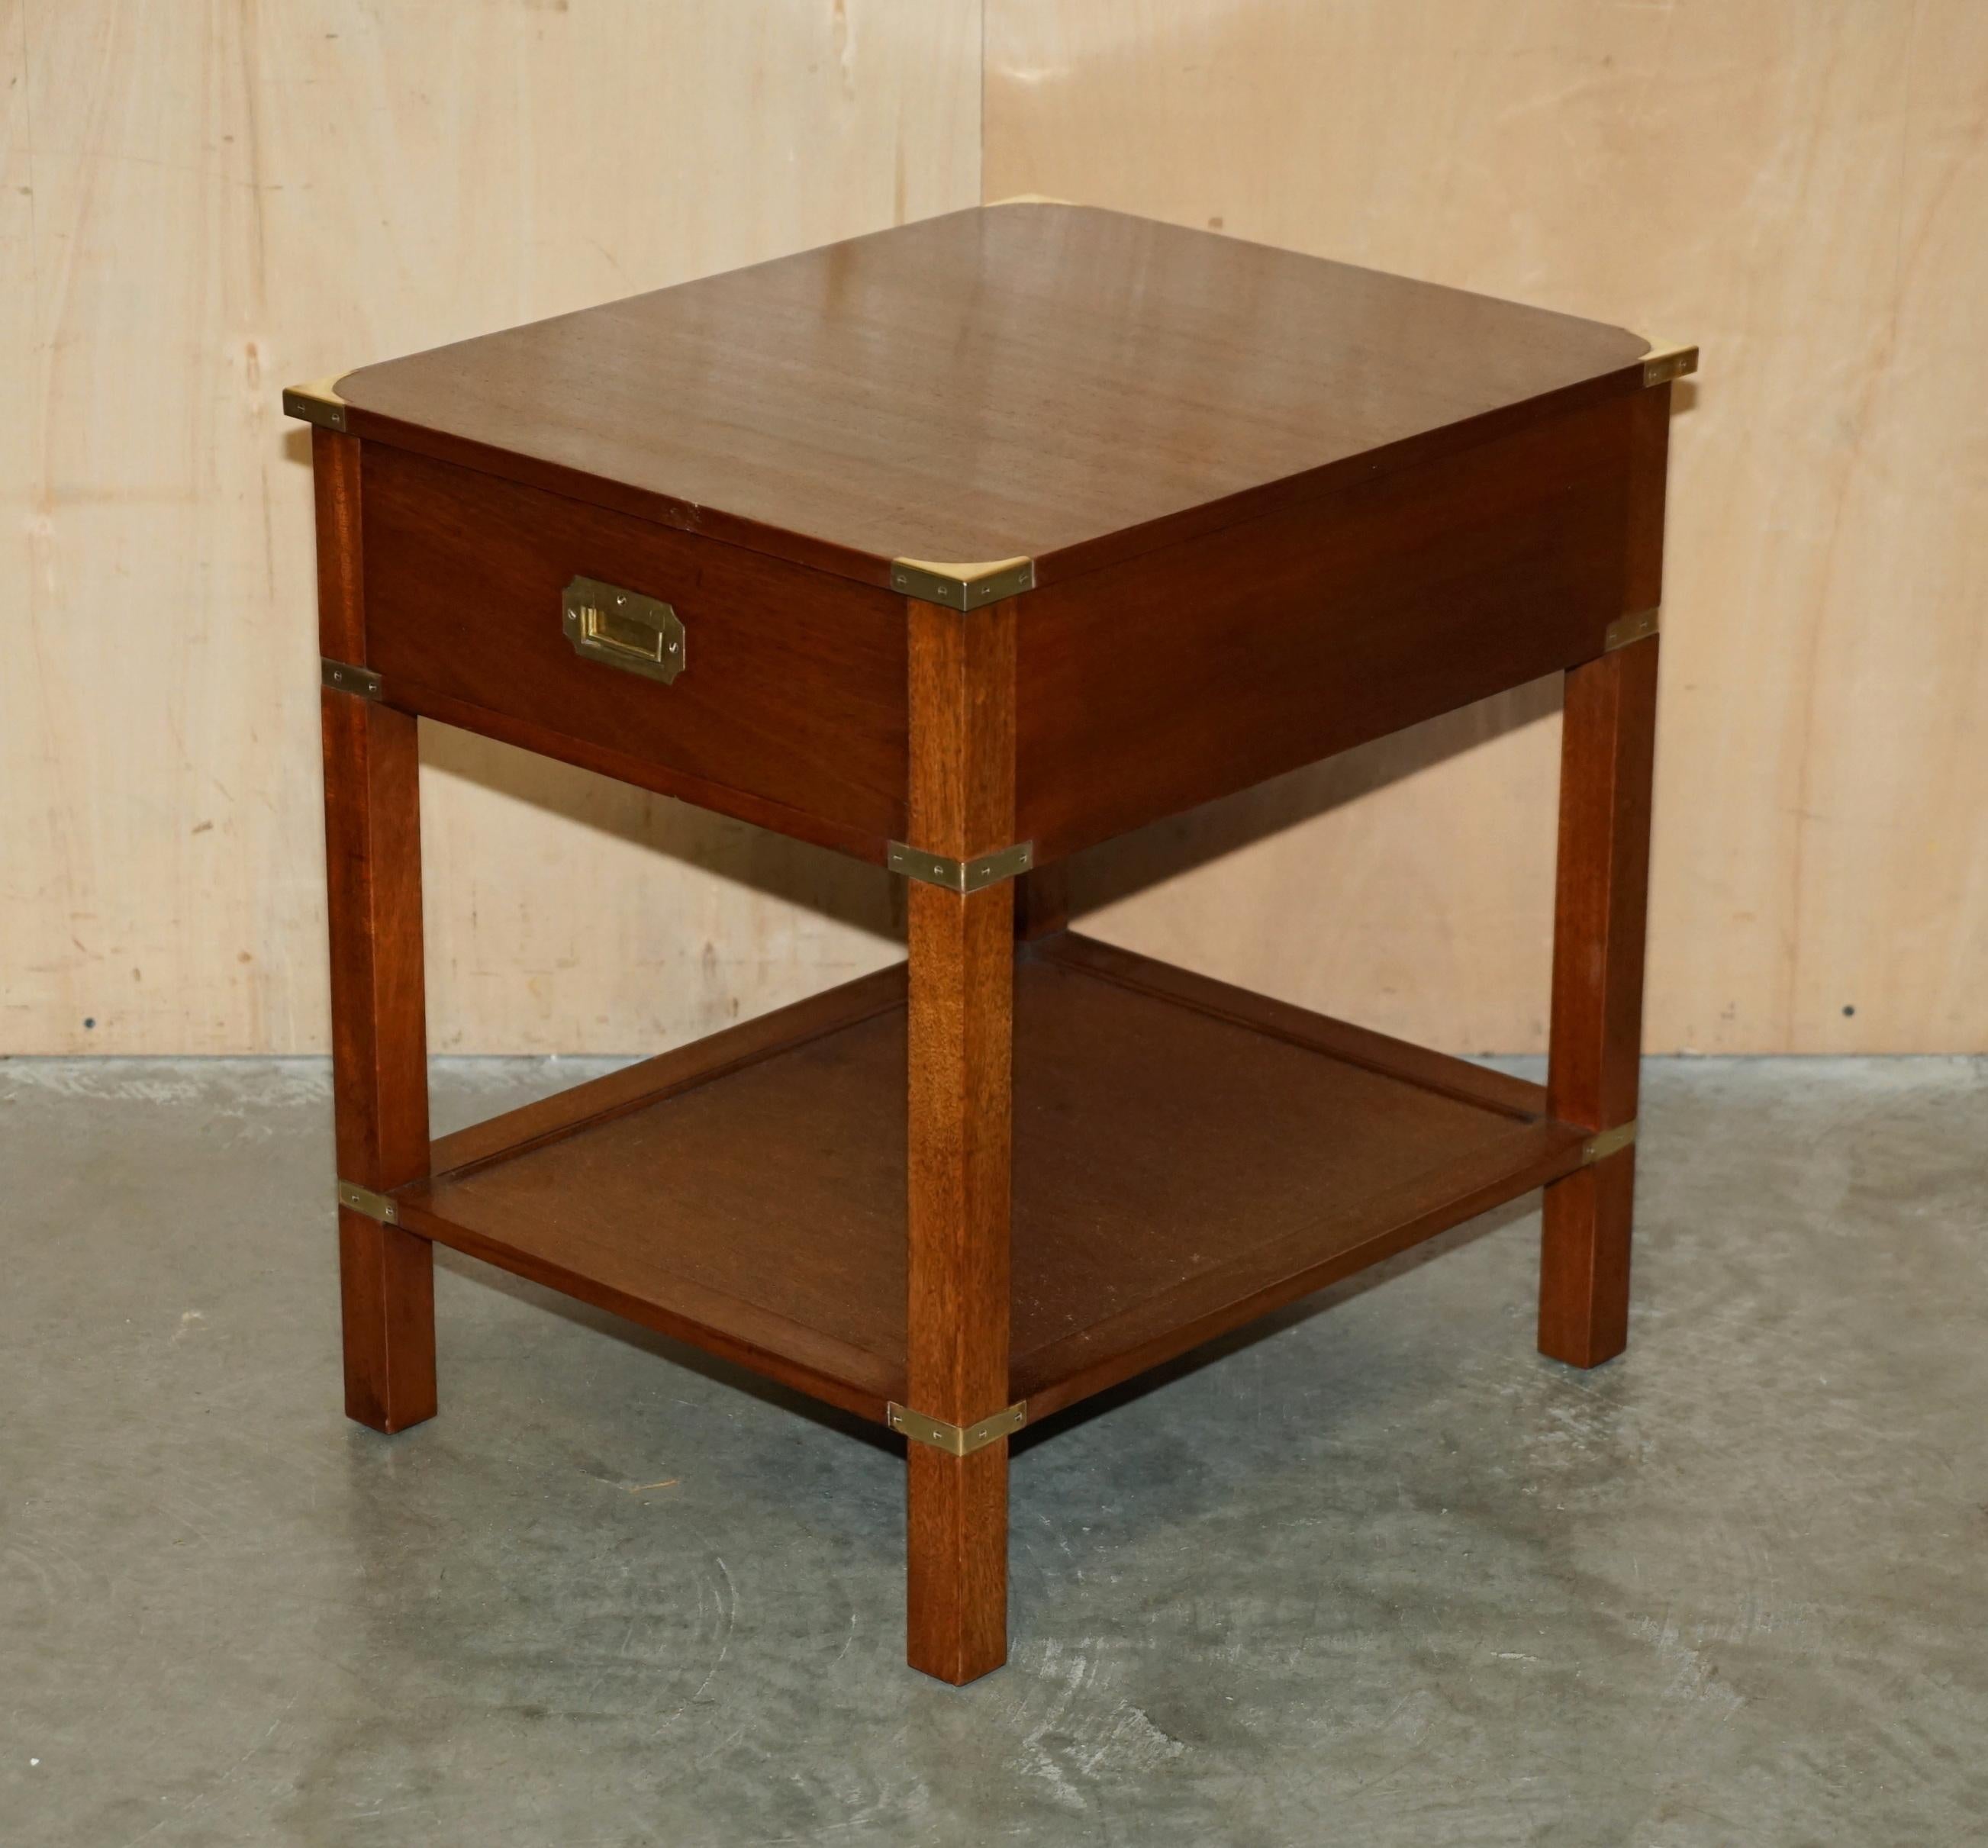 Royal House Antiques

Royal House Antiques is delighted to offer for sale this stunning pair of fully restored and French Polished Harrods Kennedy large side tables with single drawers 

Please note the delivery fee listed is just a guide, it covers